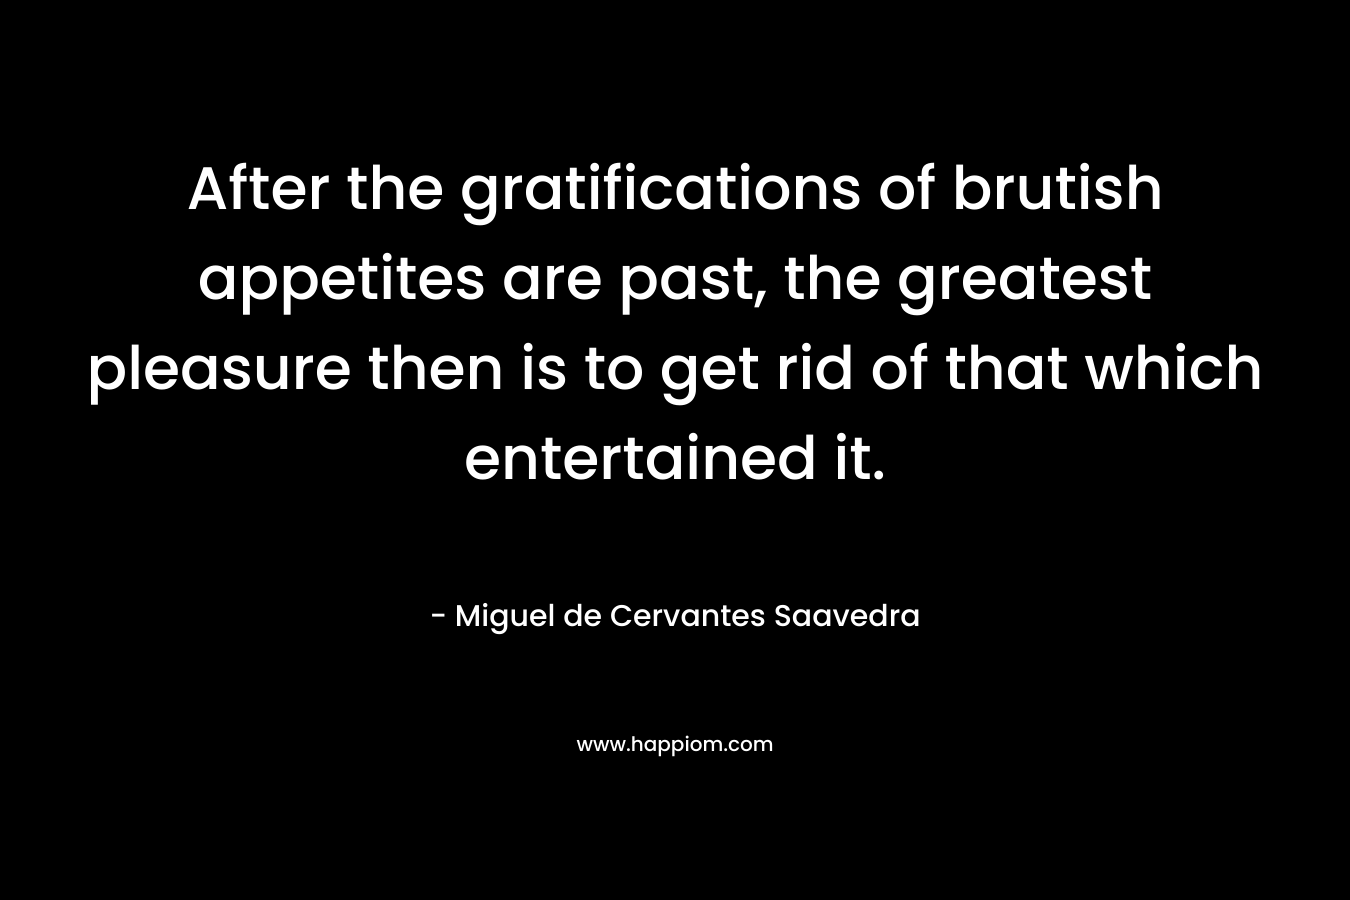 After the gratifications of brutish appetites are past, the greatest pleasure then is to get rid of that which entertained it.